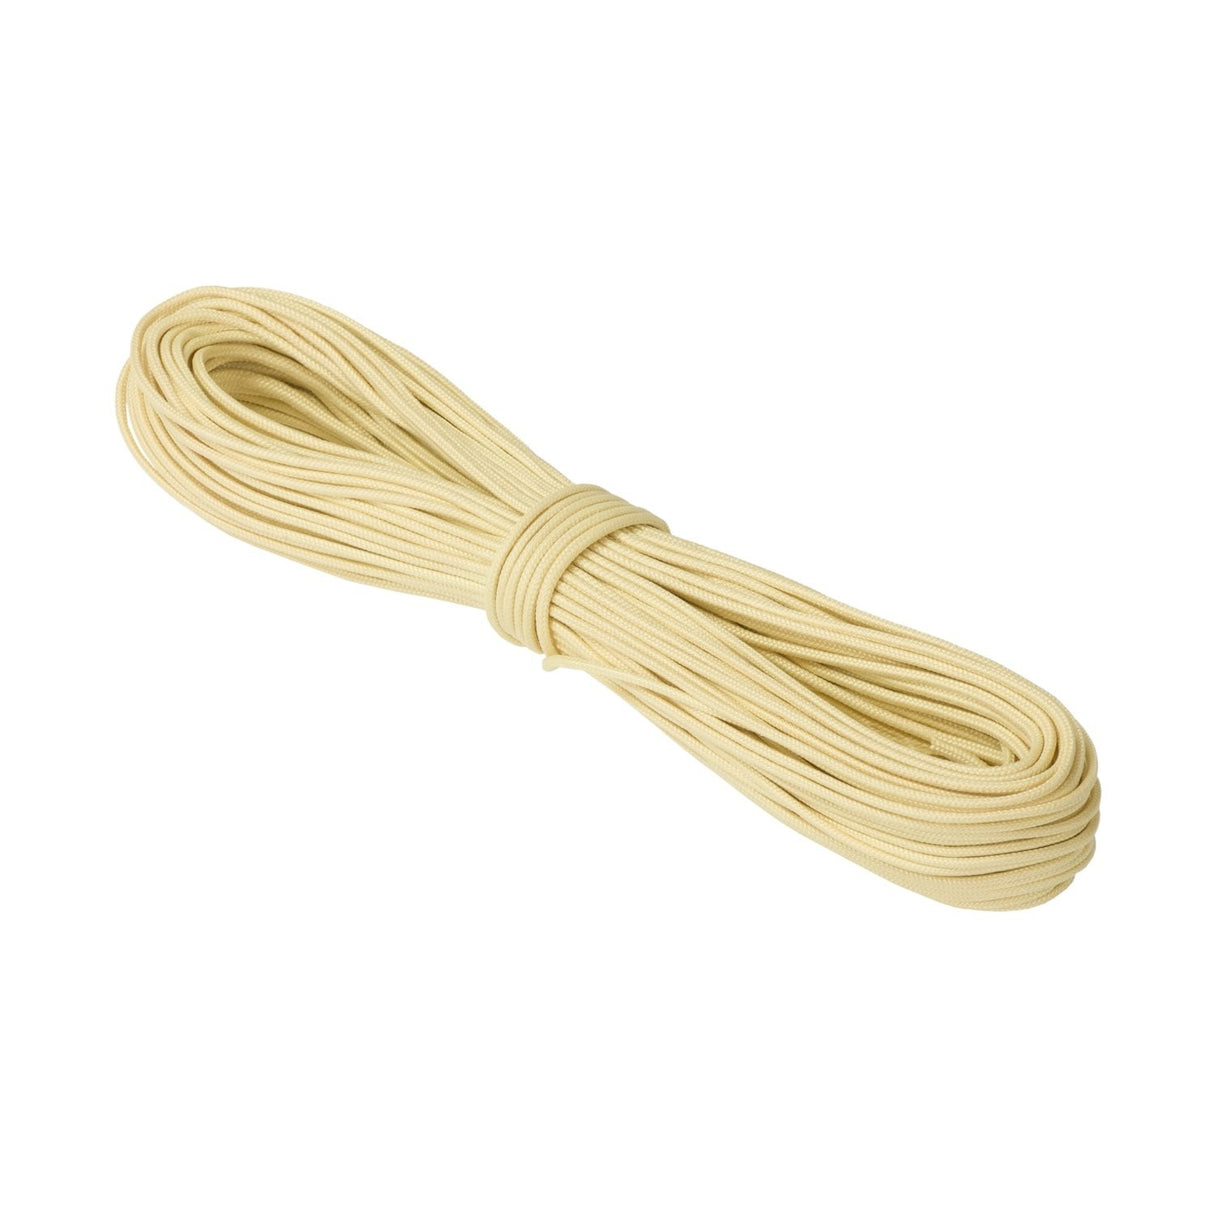 Atwood Rope MFG Tactical Kevlar 3/32 (100ft)